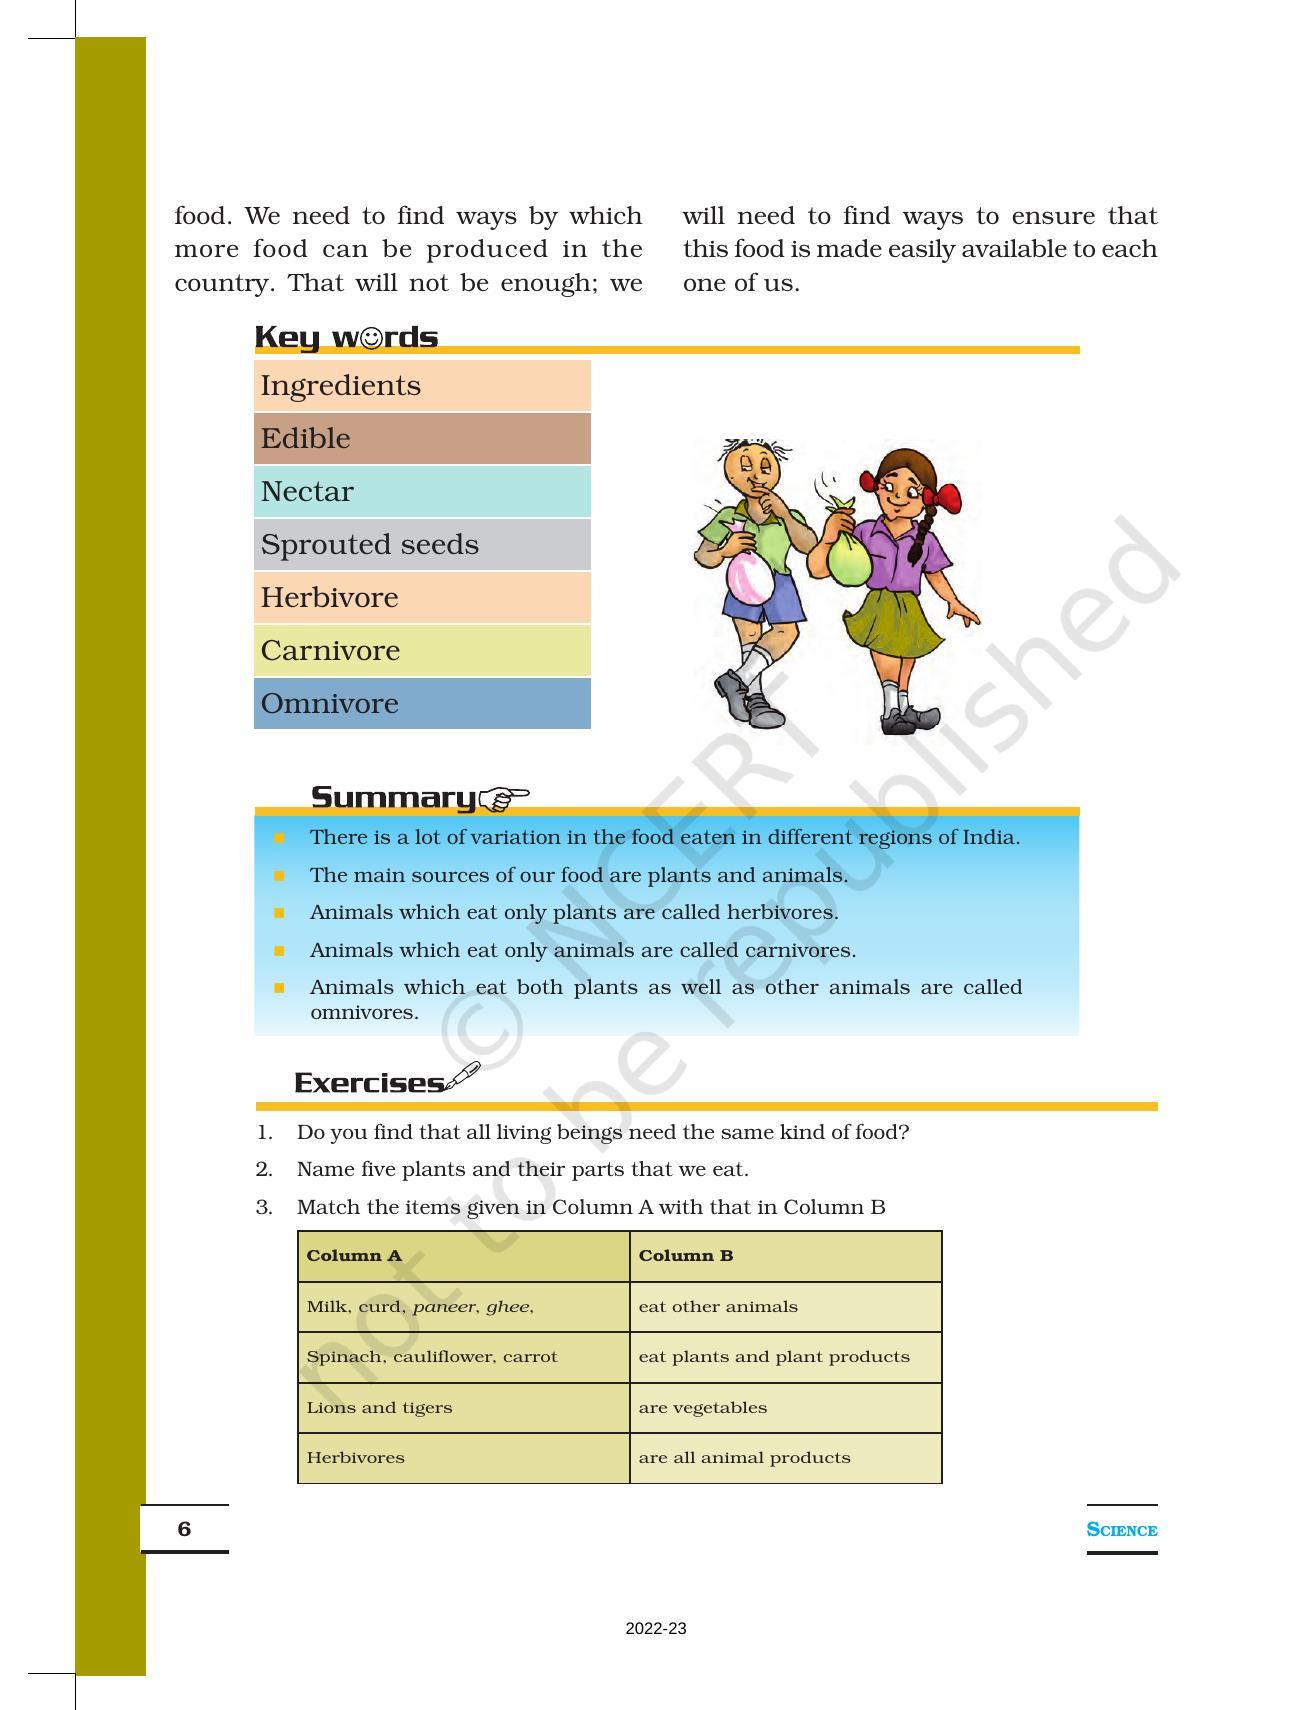 NCERT Book for Class 6 Science: Chapter 1-Food, Where Does It Come From? - Page 6